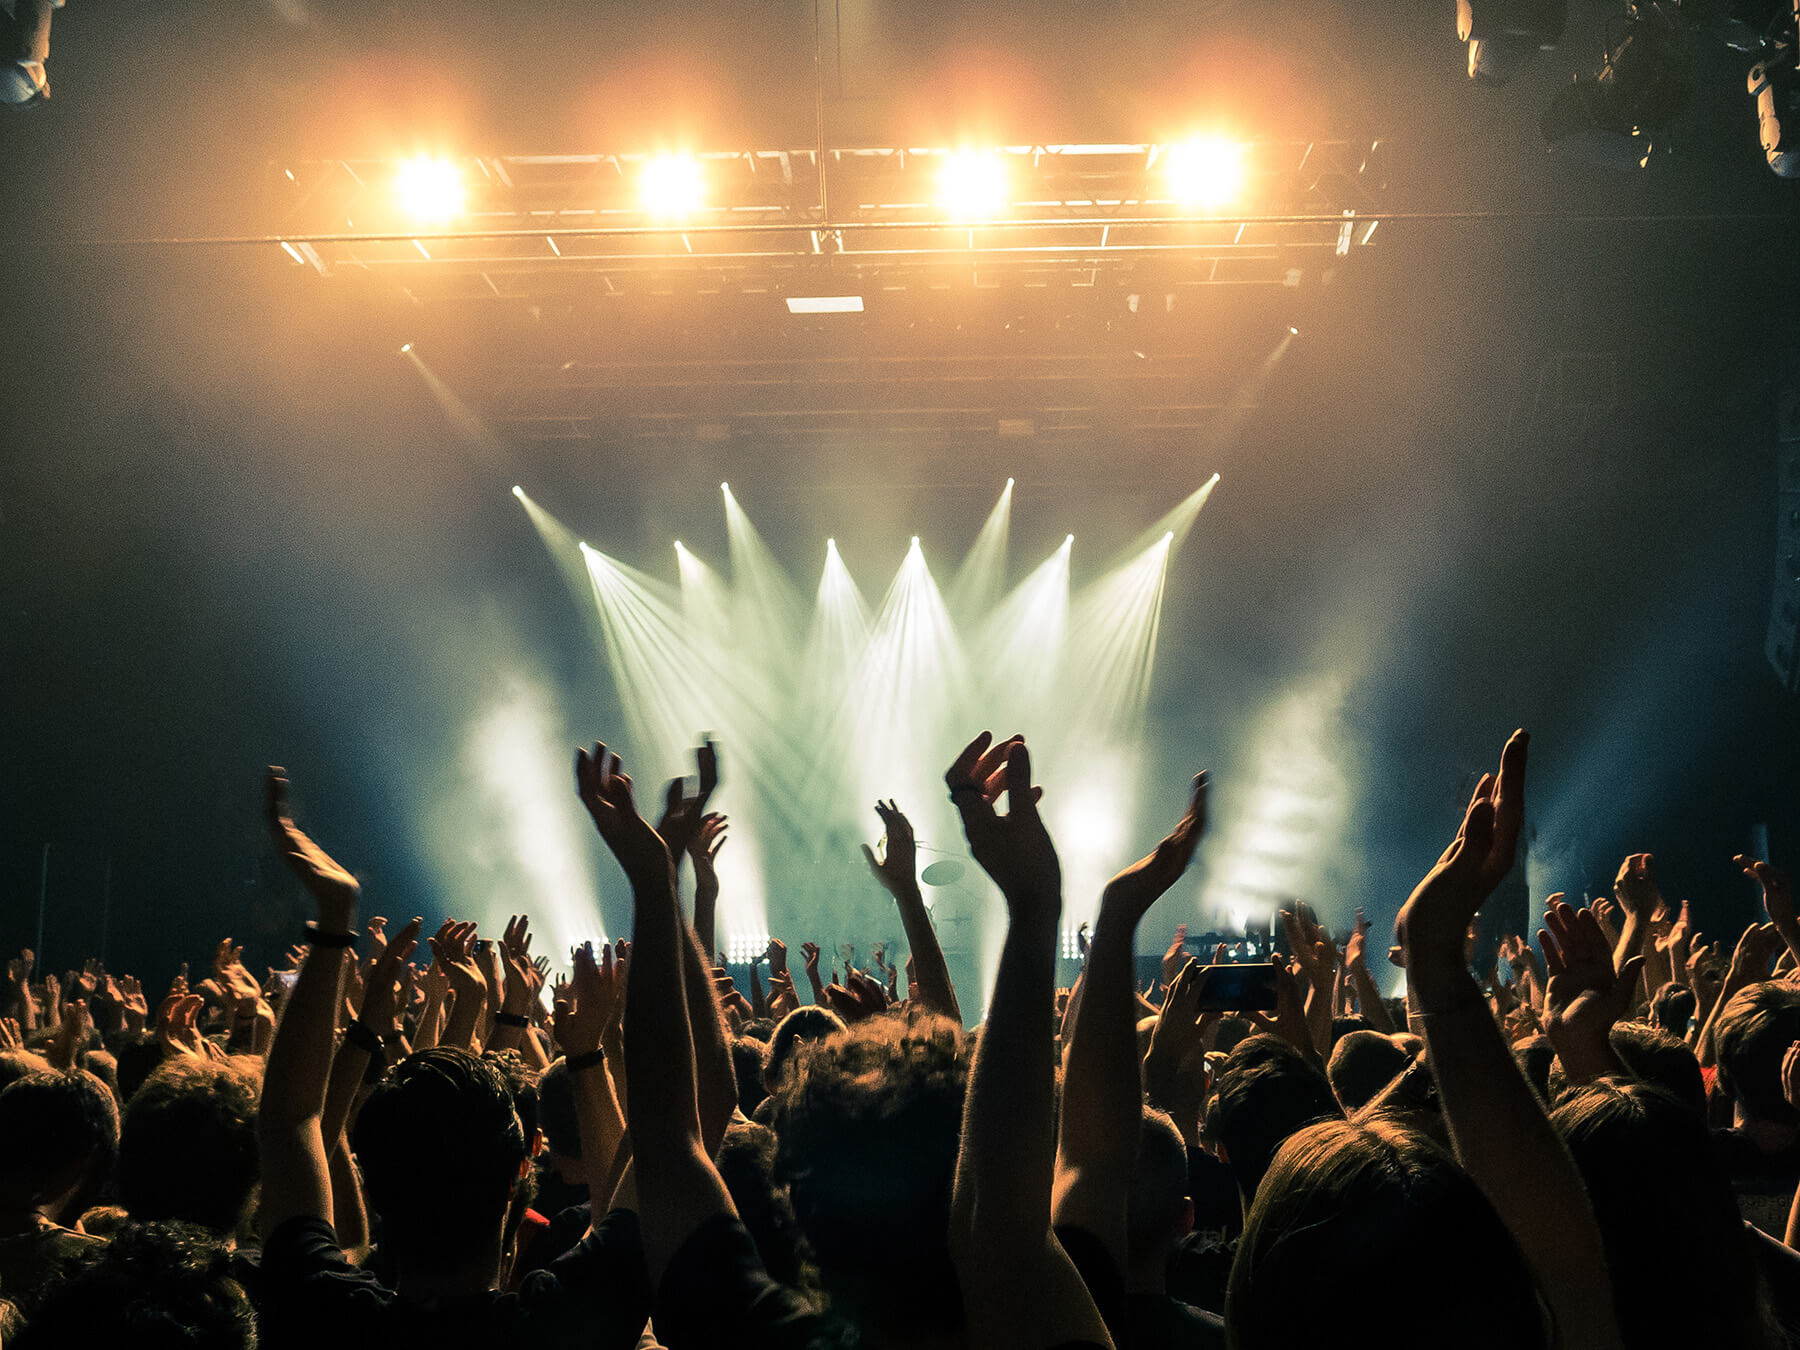 Finding the Best Concert Seats | Rocky Mount Event Center